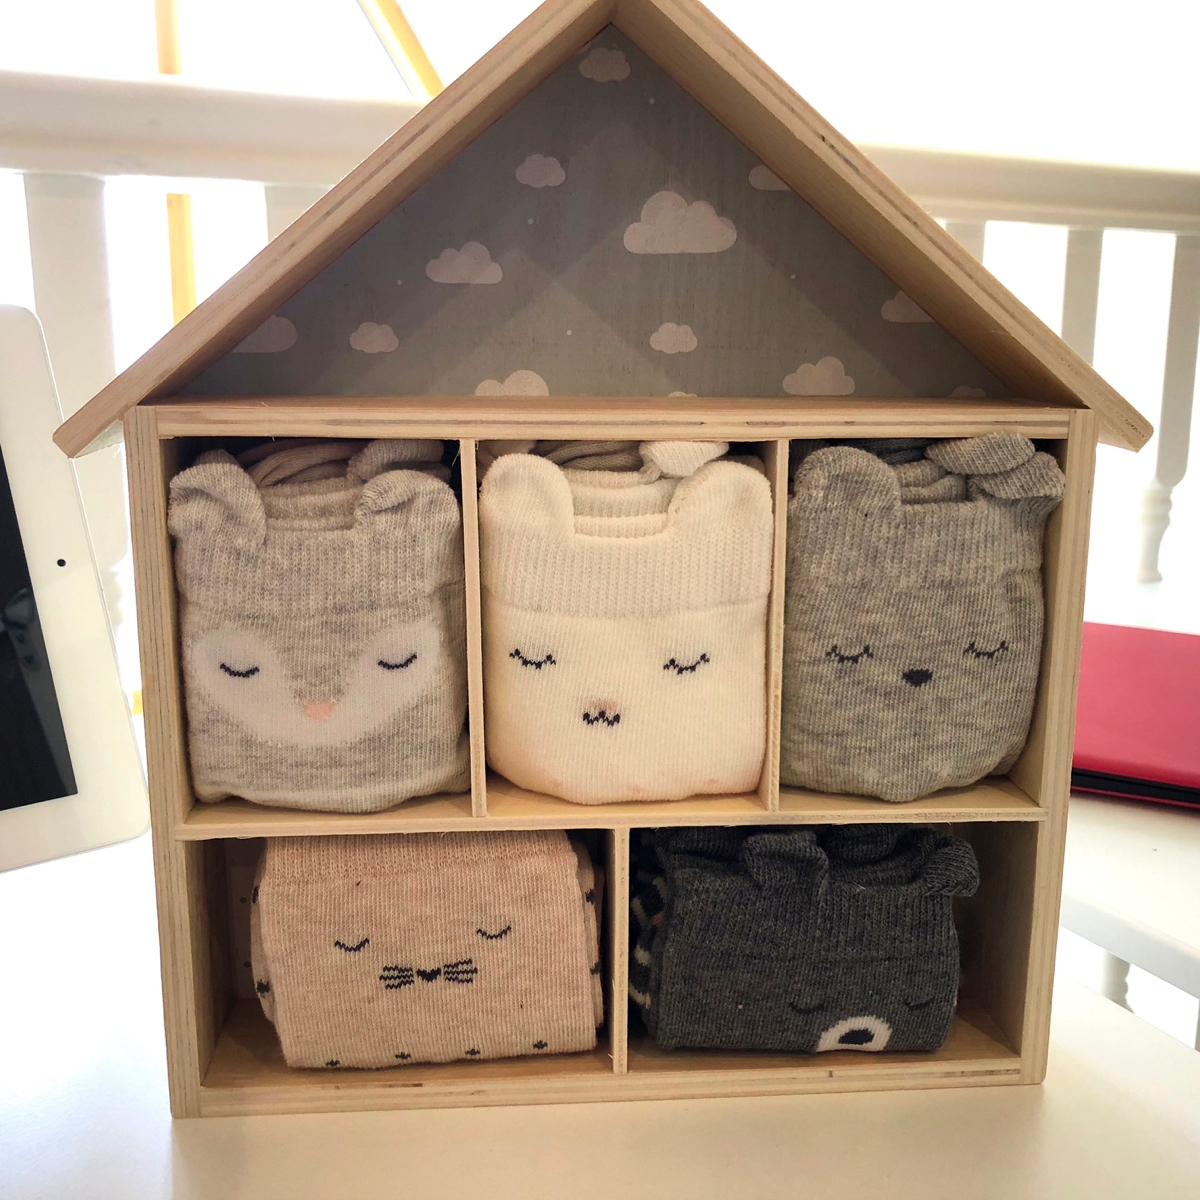 A little wooden shelving unit made to look like a house, containing five pairs of rolled up socks with sleeping animal faces.